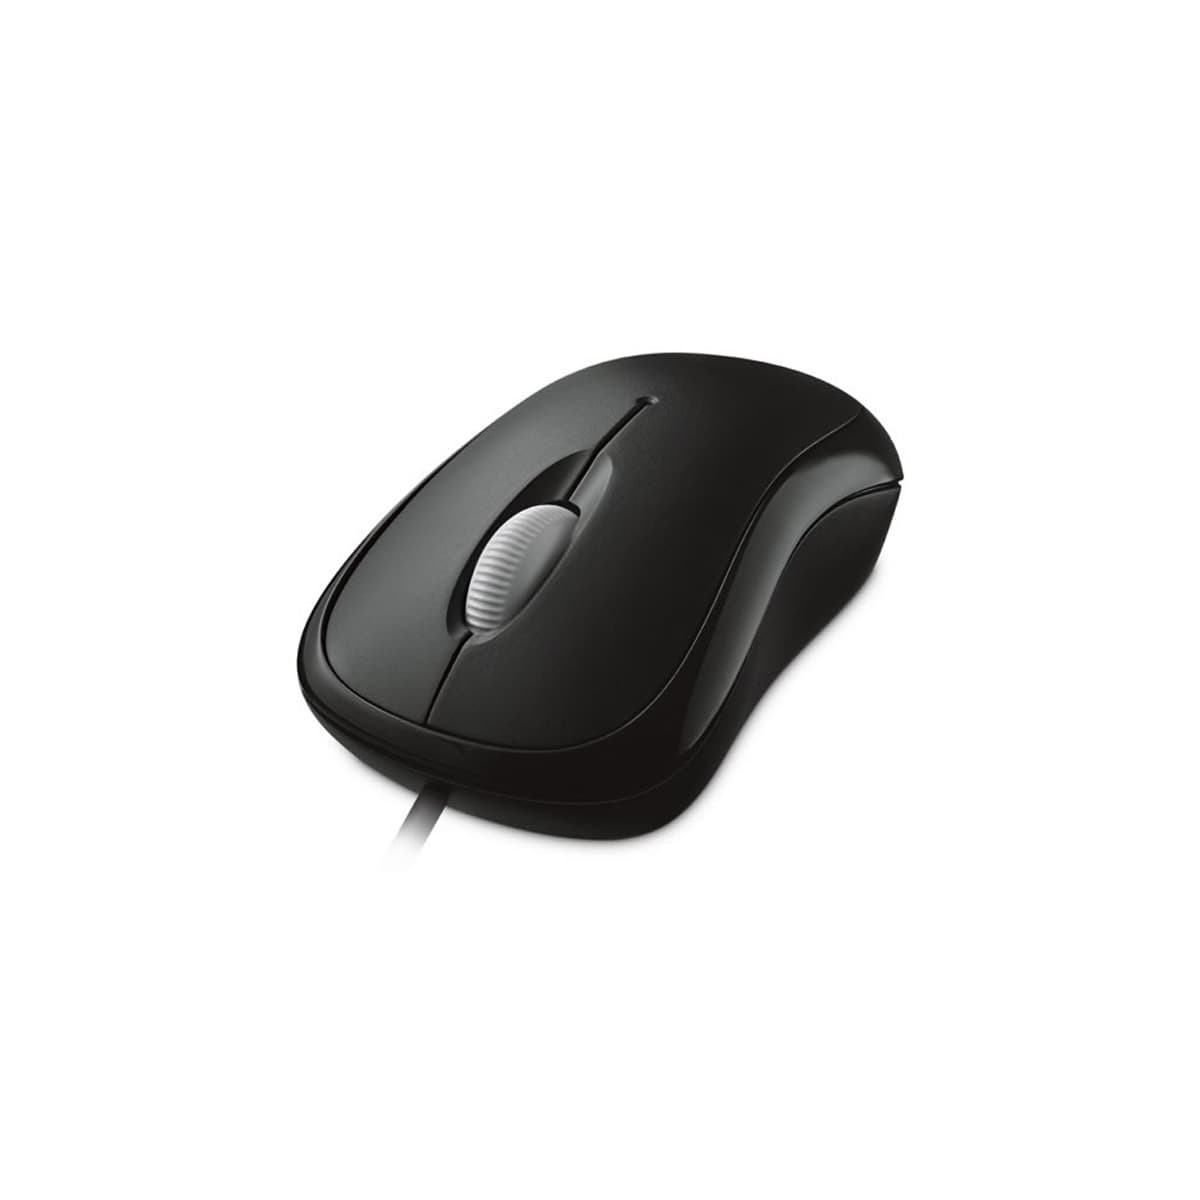 4YH-00005 – MICROSOFT BASIC OPTICAL MOUSE FOR BUSINESS.03